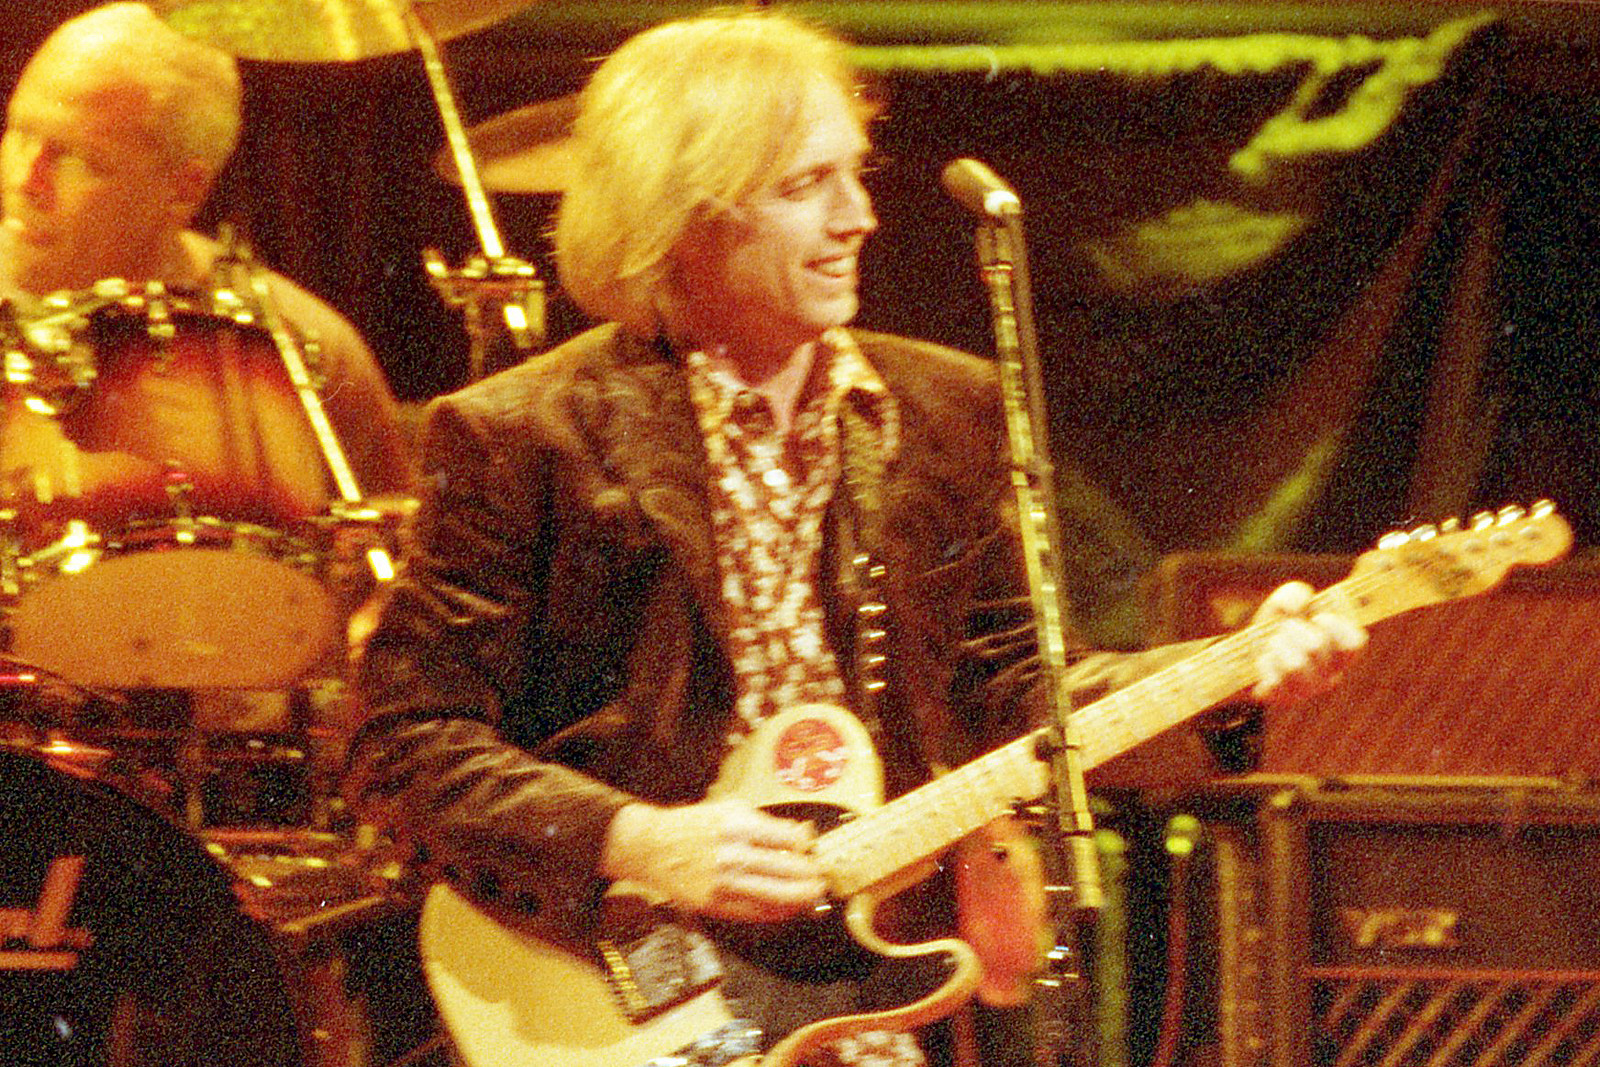 Listen to Two Previously Unreleased Tom Petty Songs